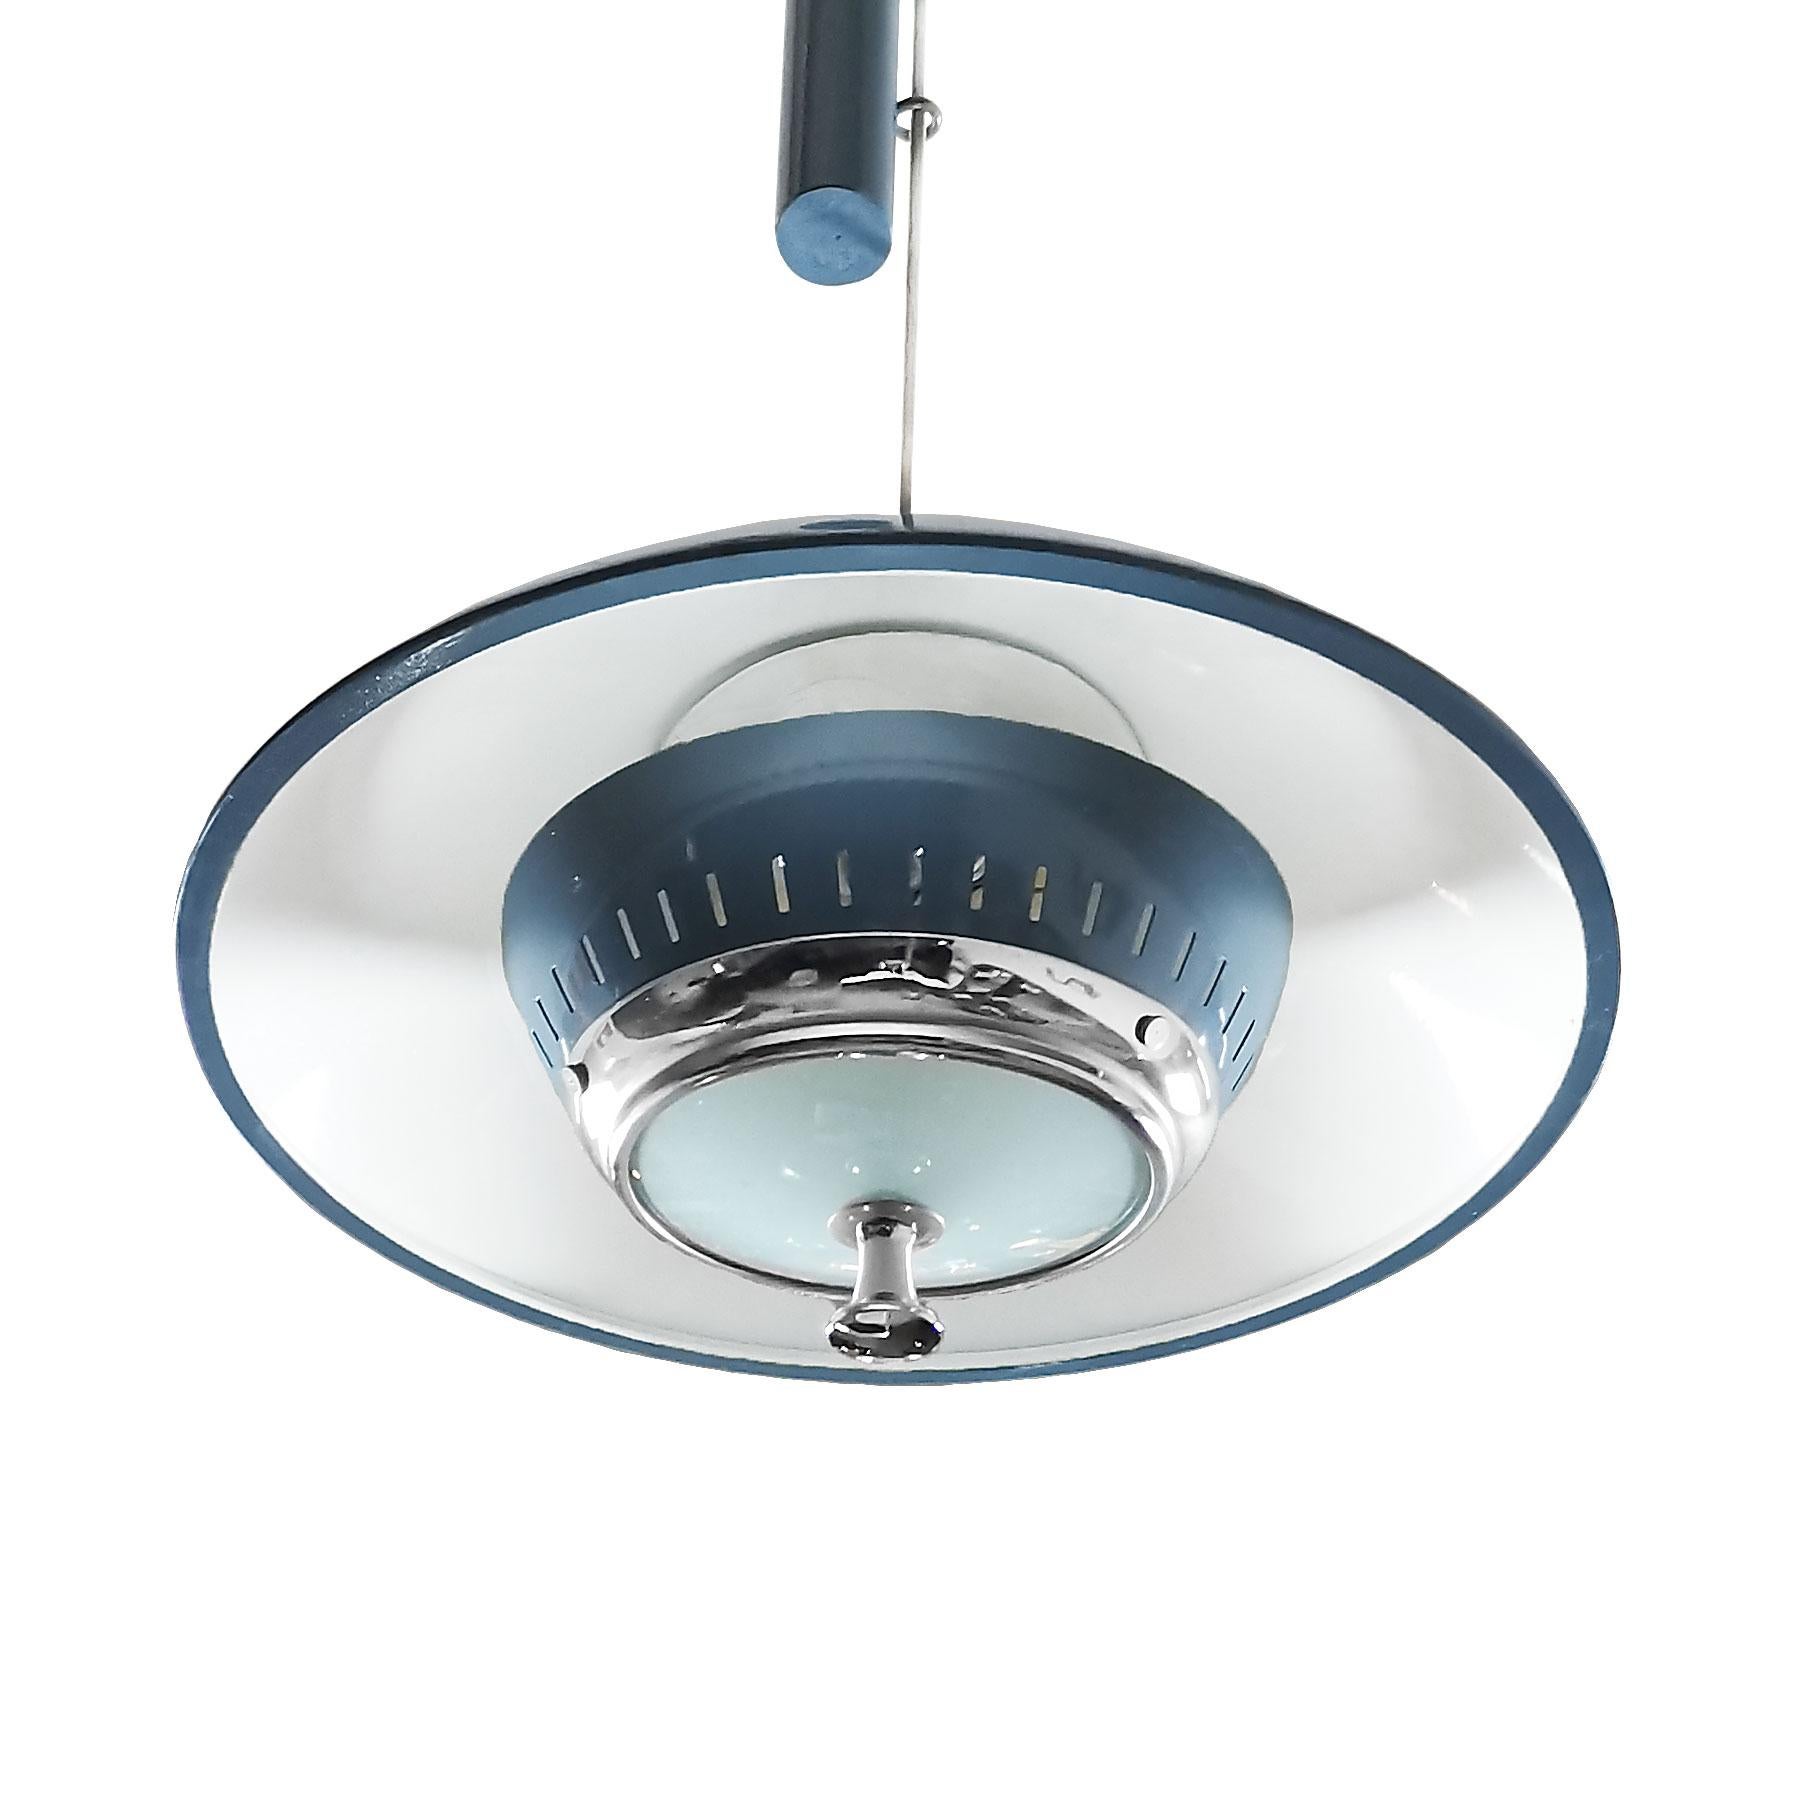 Ceiling lamp with counterweight system, blue lacquered sheet metal, nickel-plated metal and satiny glass.
Italy, circa 1940.

Max. height 147 cm
Min. height 107 cm